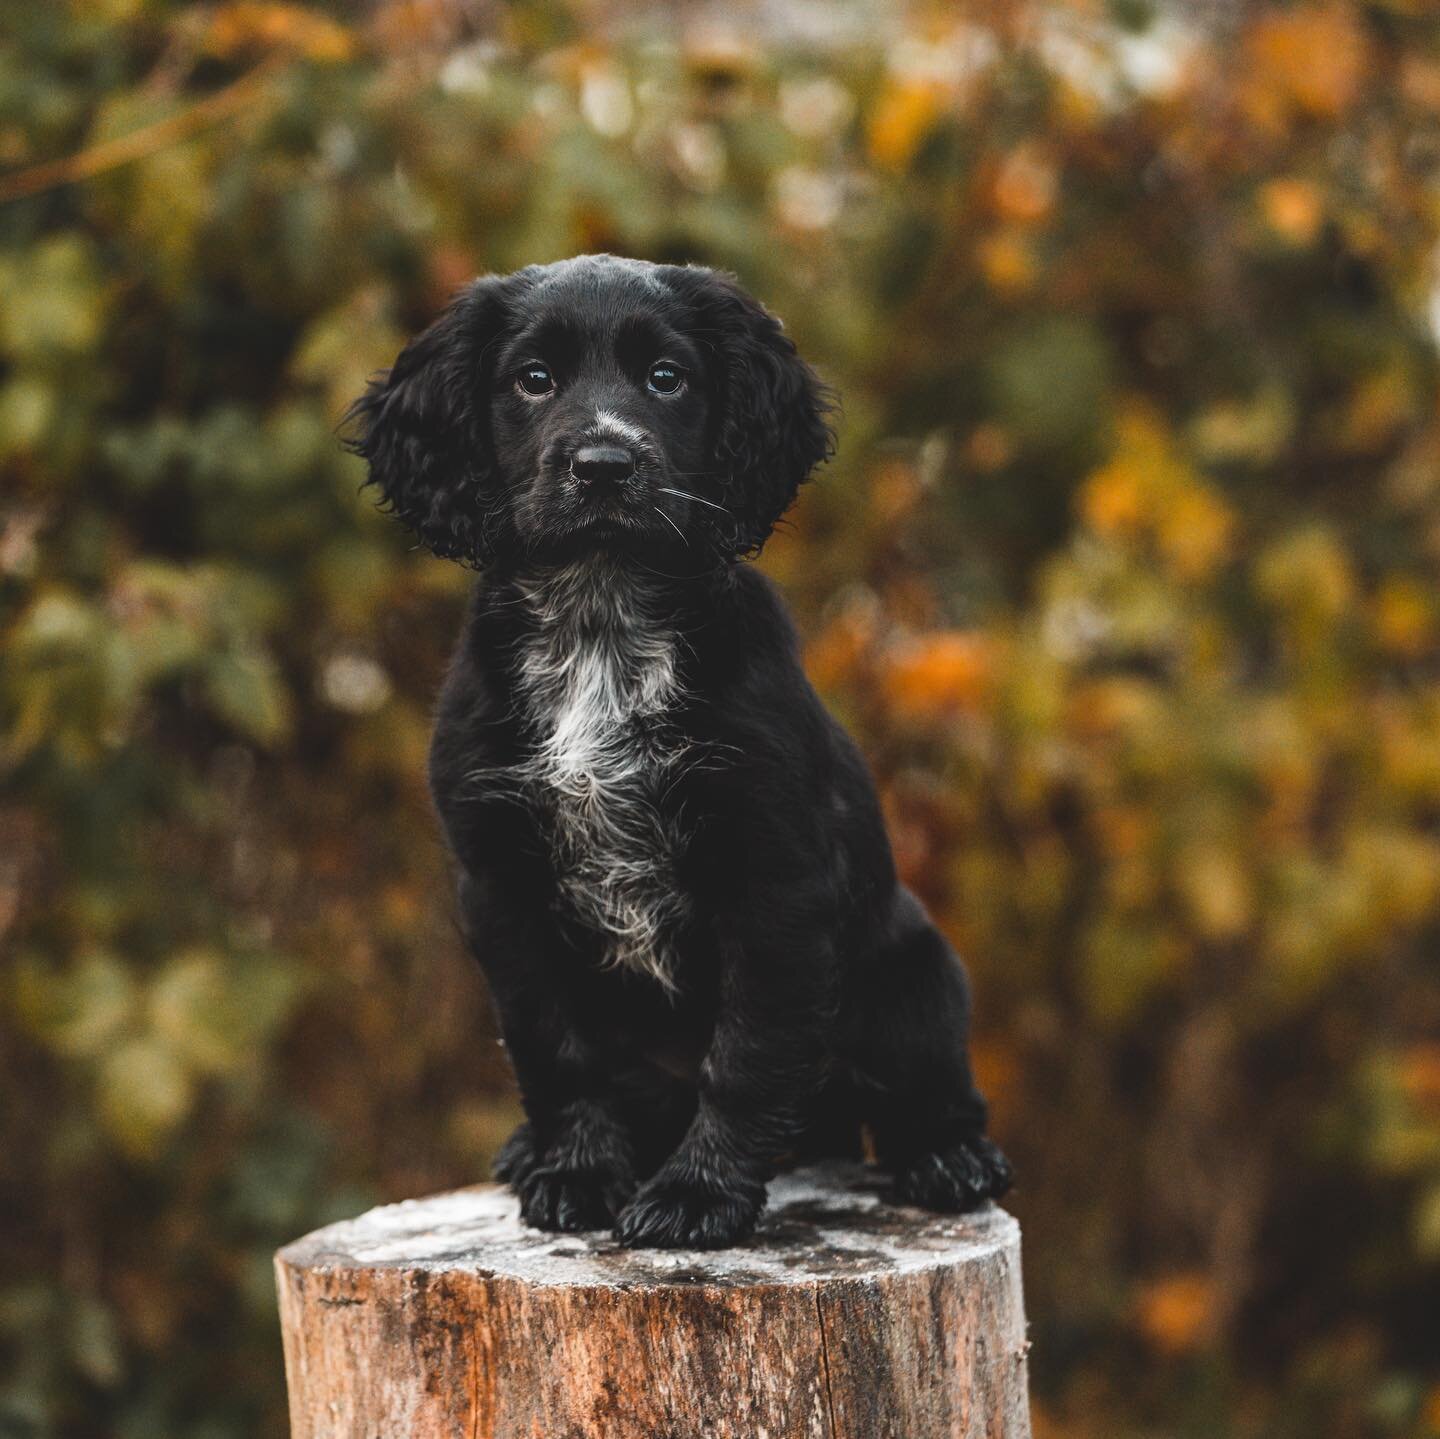 Say hello to the newest ELP clan member 🐶 

This is Fig&hellip; aka Figlet, Dark Destroyer or Figgy Pudding 💕 She is the most gorgeous and loving cocker spaniel&hellip; although her gnashes are still those puppy razor blades 🫣 I&rsquo;m not going 